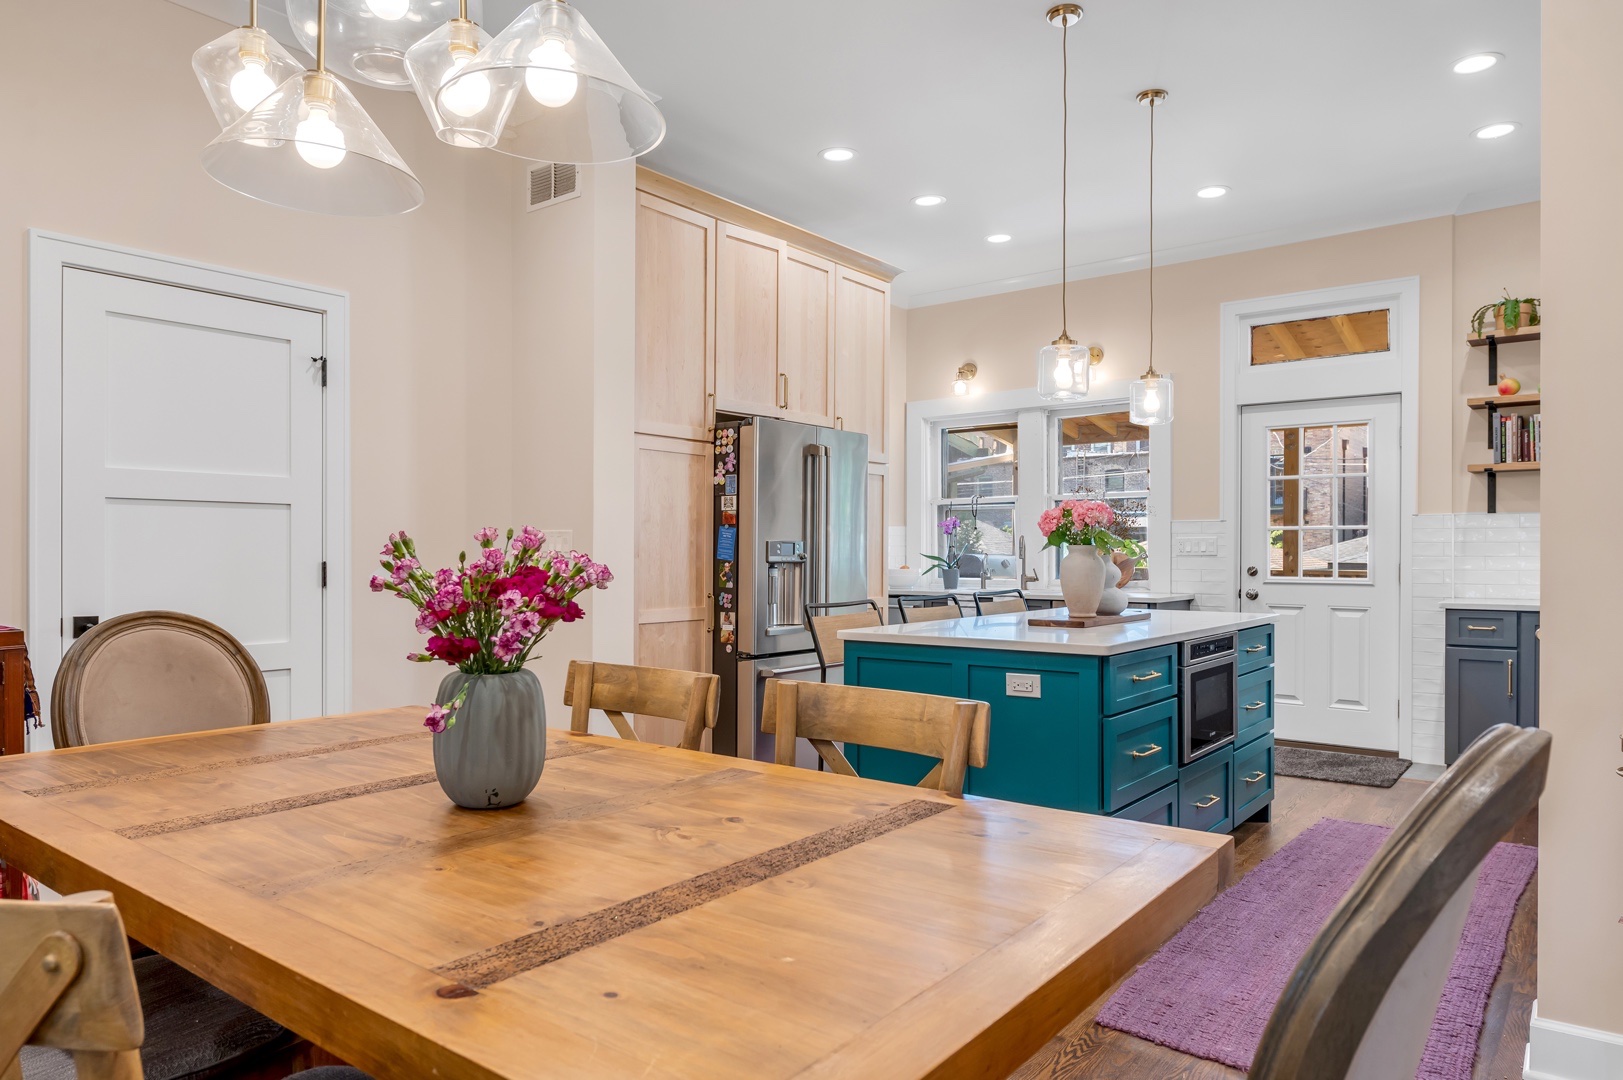 Image of fully remodeled kitchen with light fixtures above windows, open shelving, subway tile, quartz countertops, blue island cabinets, and brass hardware.